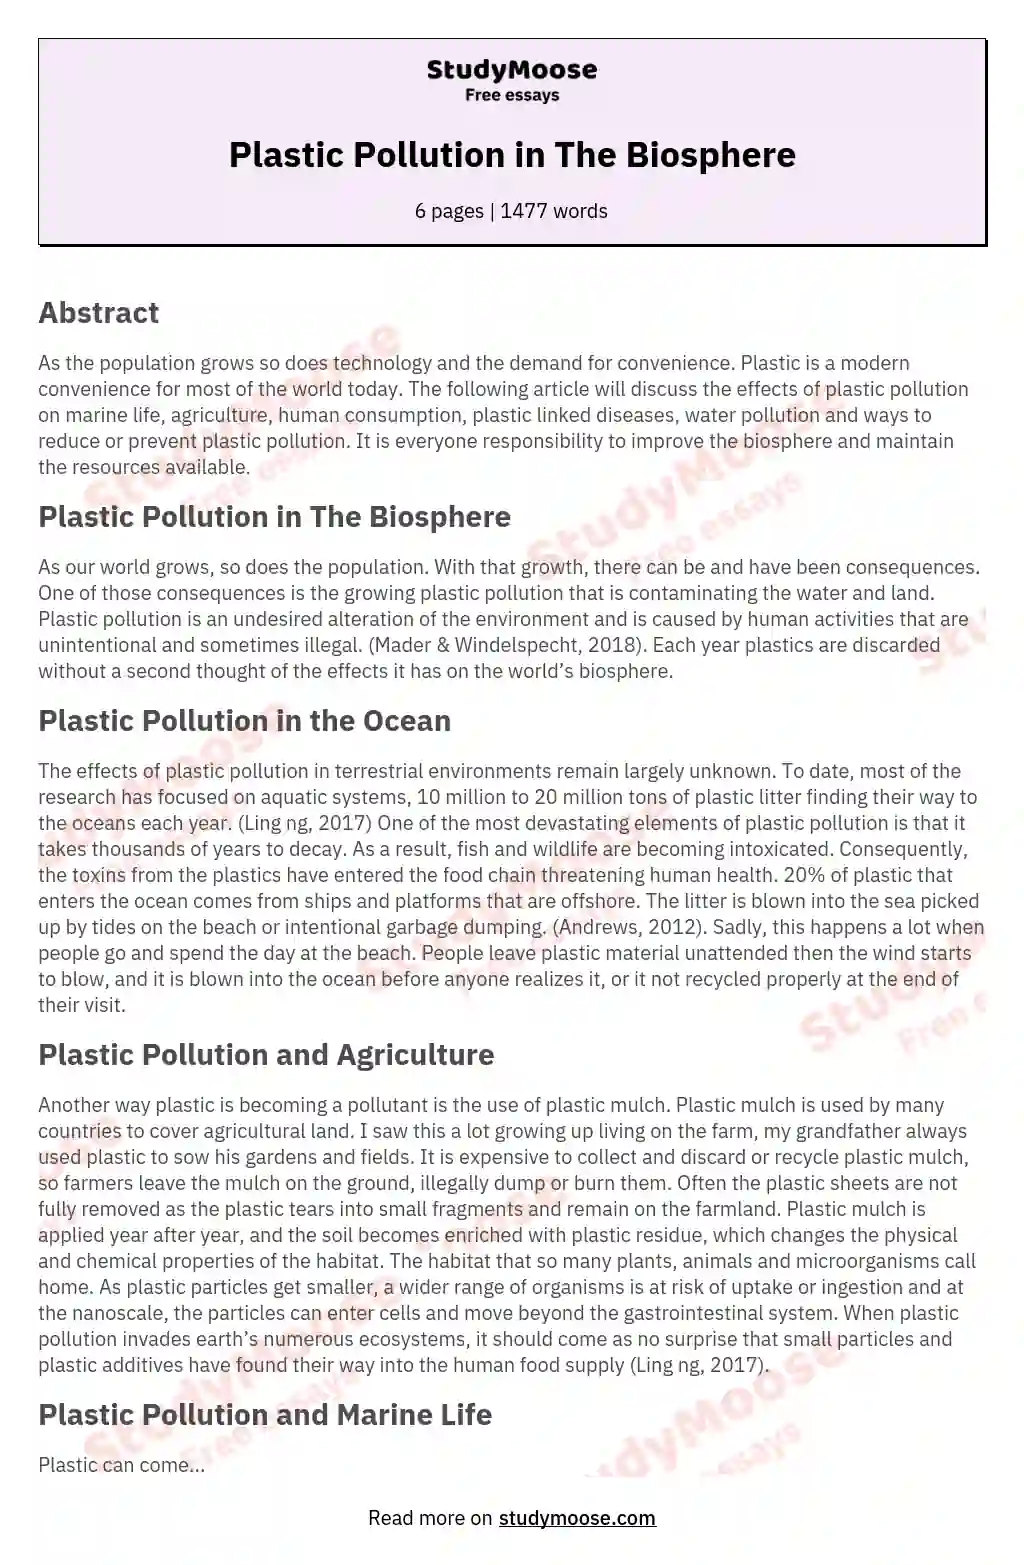 Plastic Pollution in The Biosphere essay